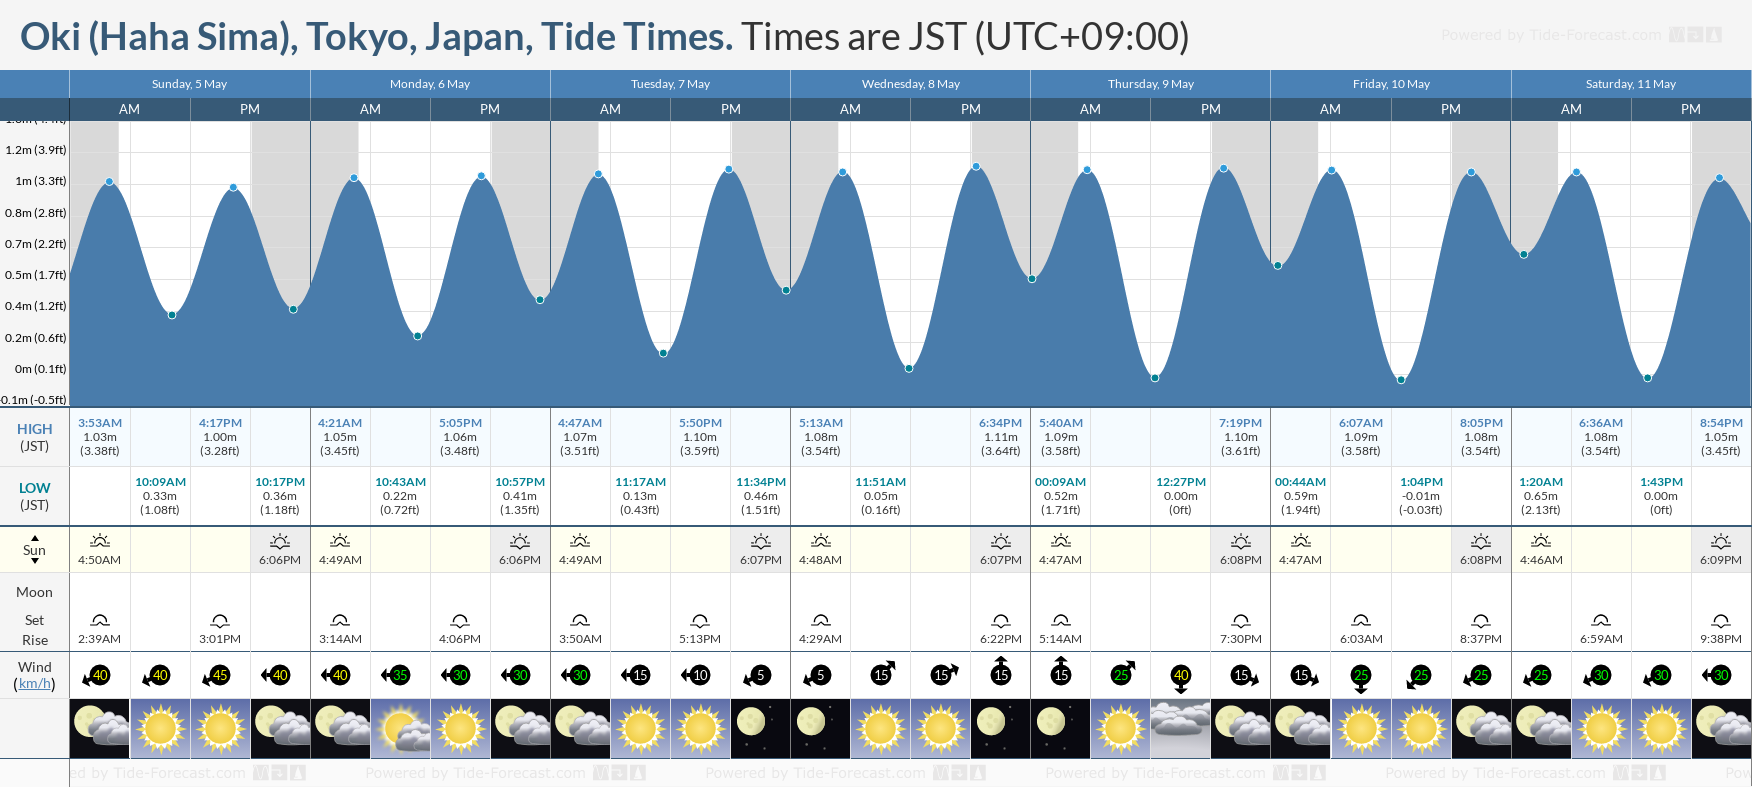 Oki (Haha Sima), Tokyo, Japan Tide Chart including high and low tide tide times for the next 7 days